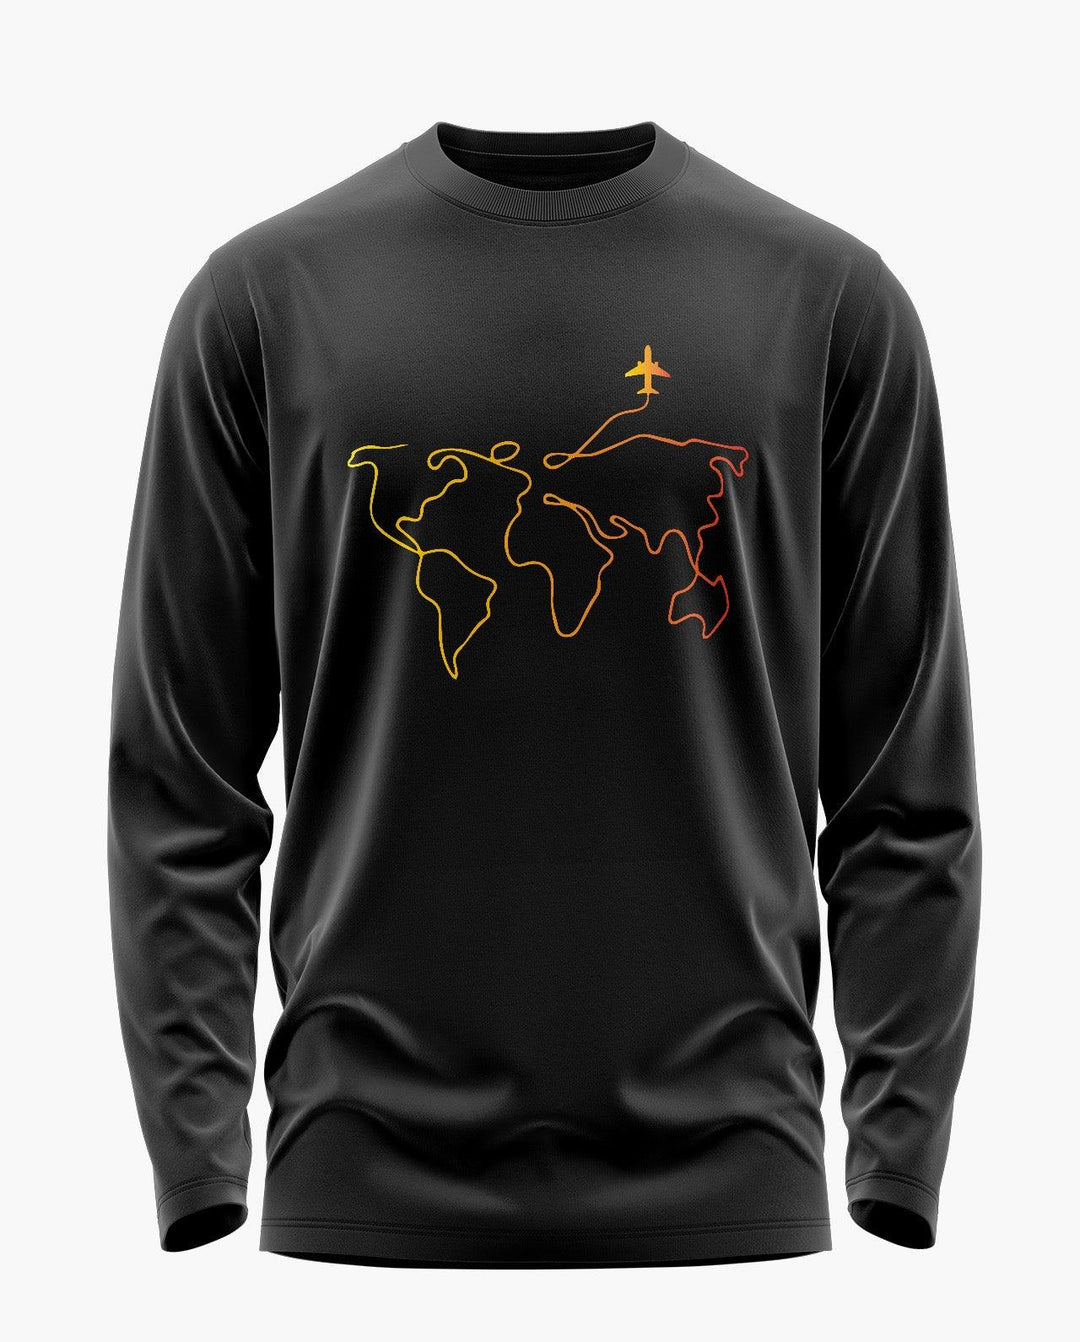 Travelling around the earth Full Sleeve T-Shirt - Aero Armour